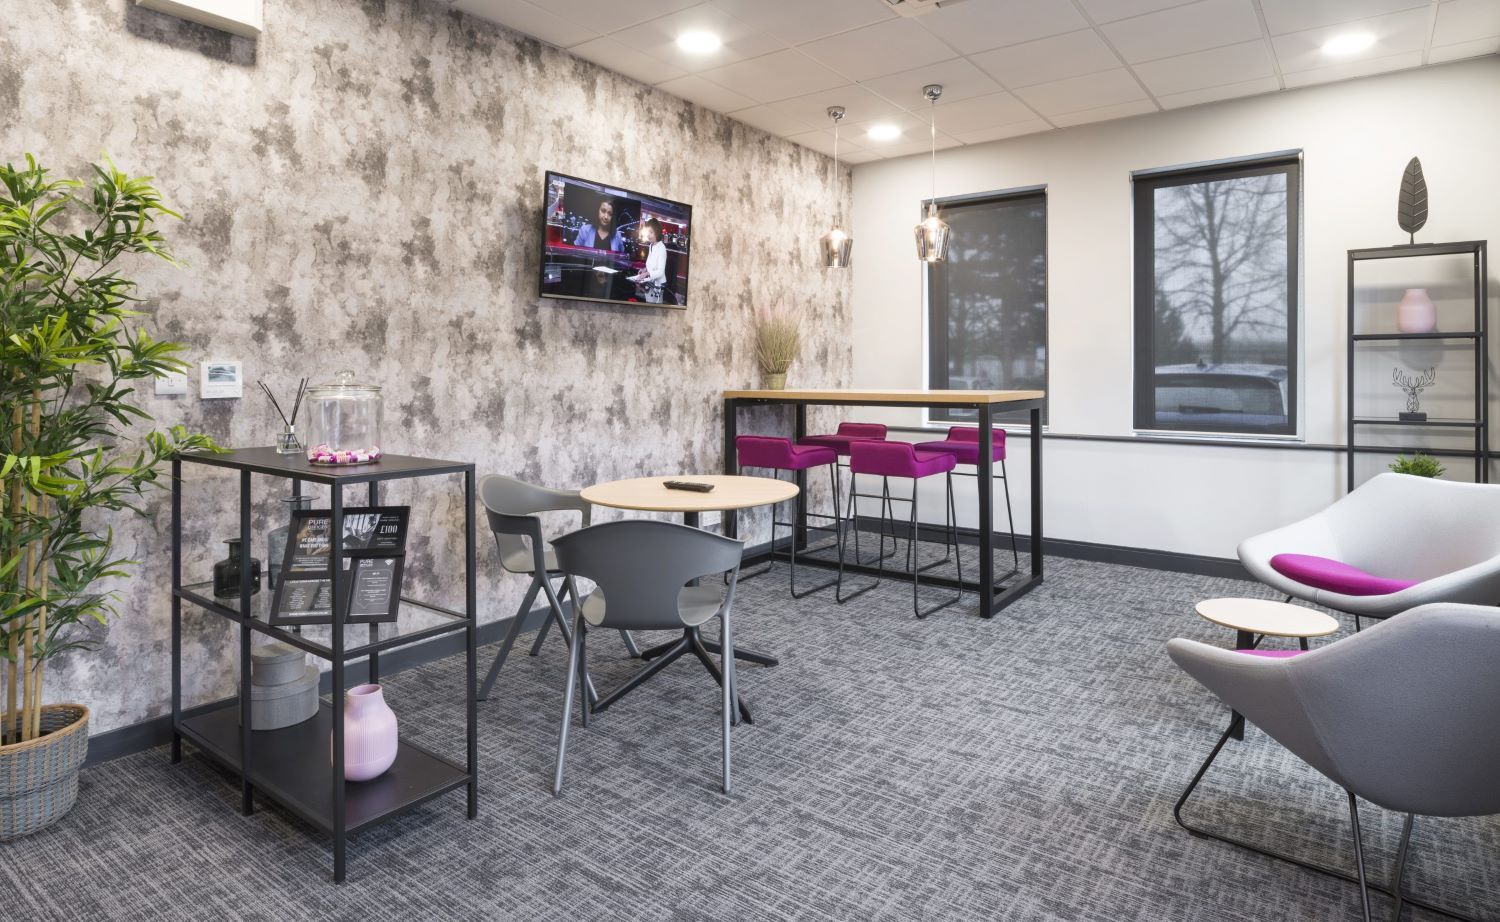 Rent serviced office space in Oxford,southern England